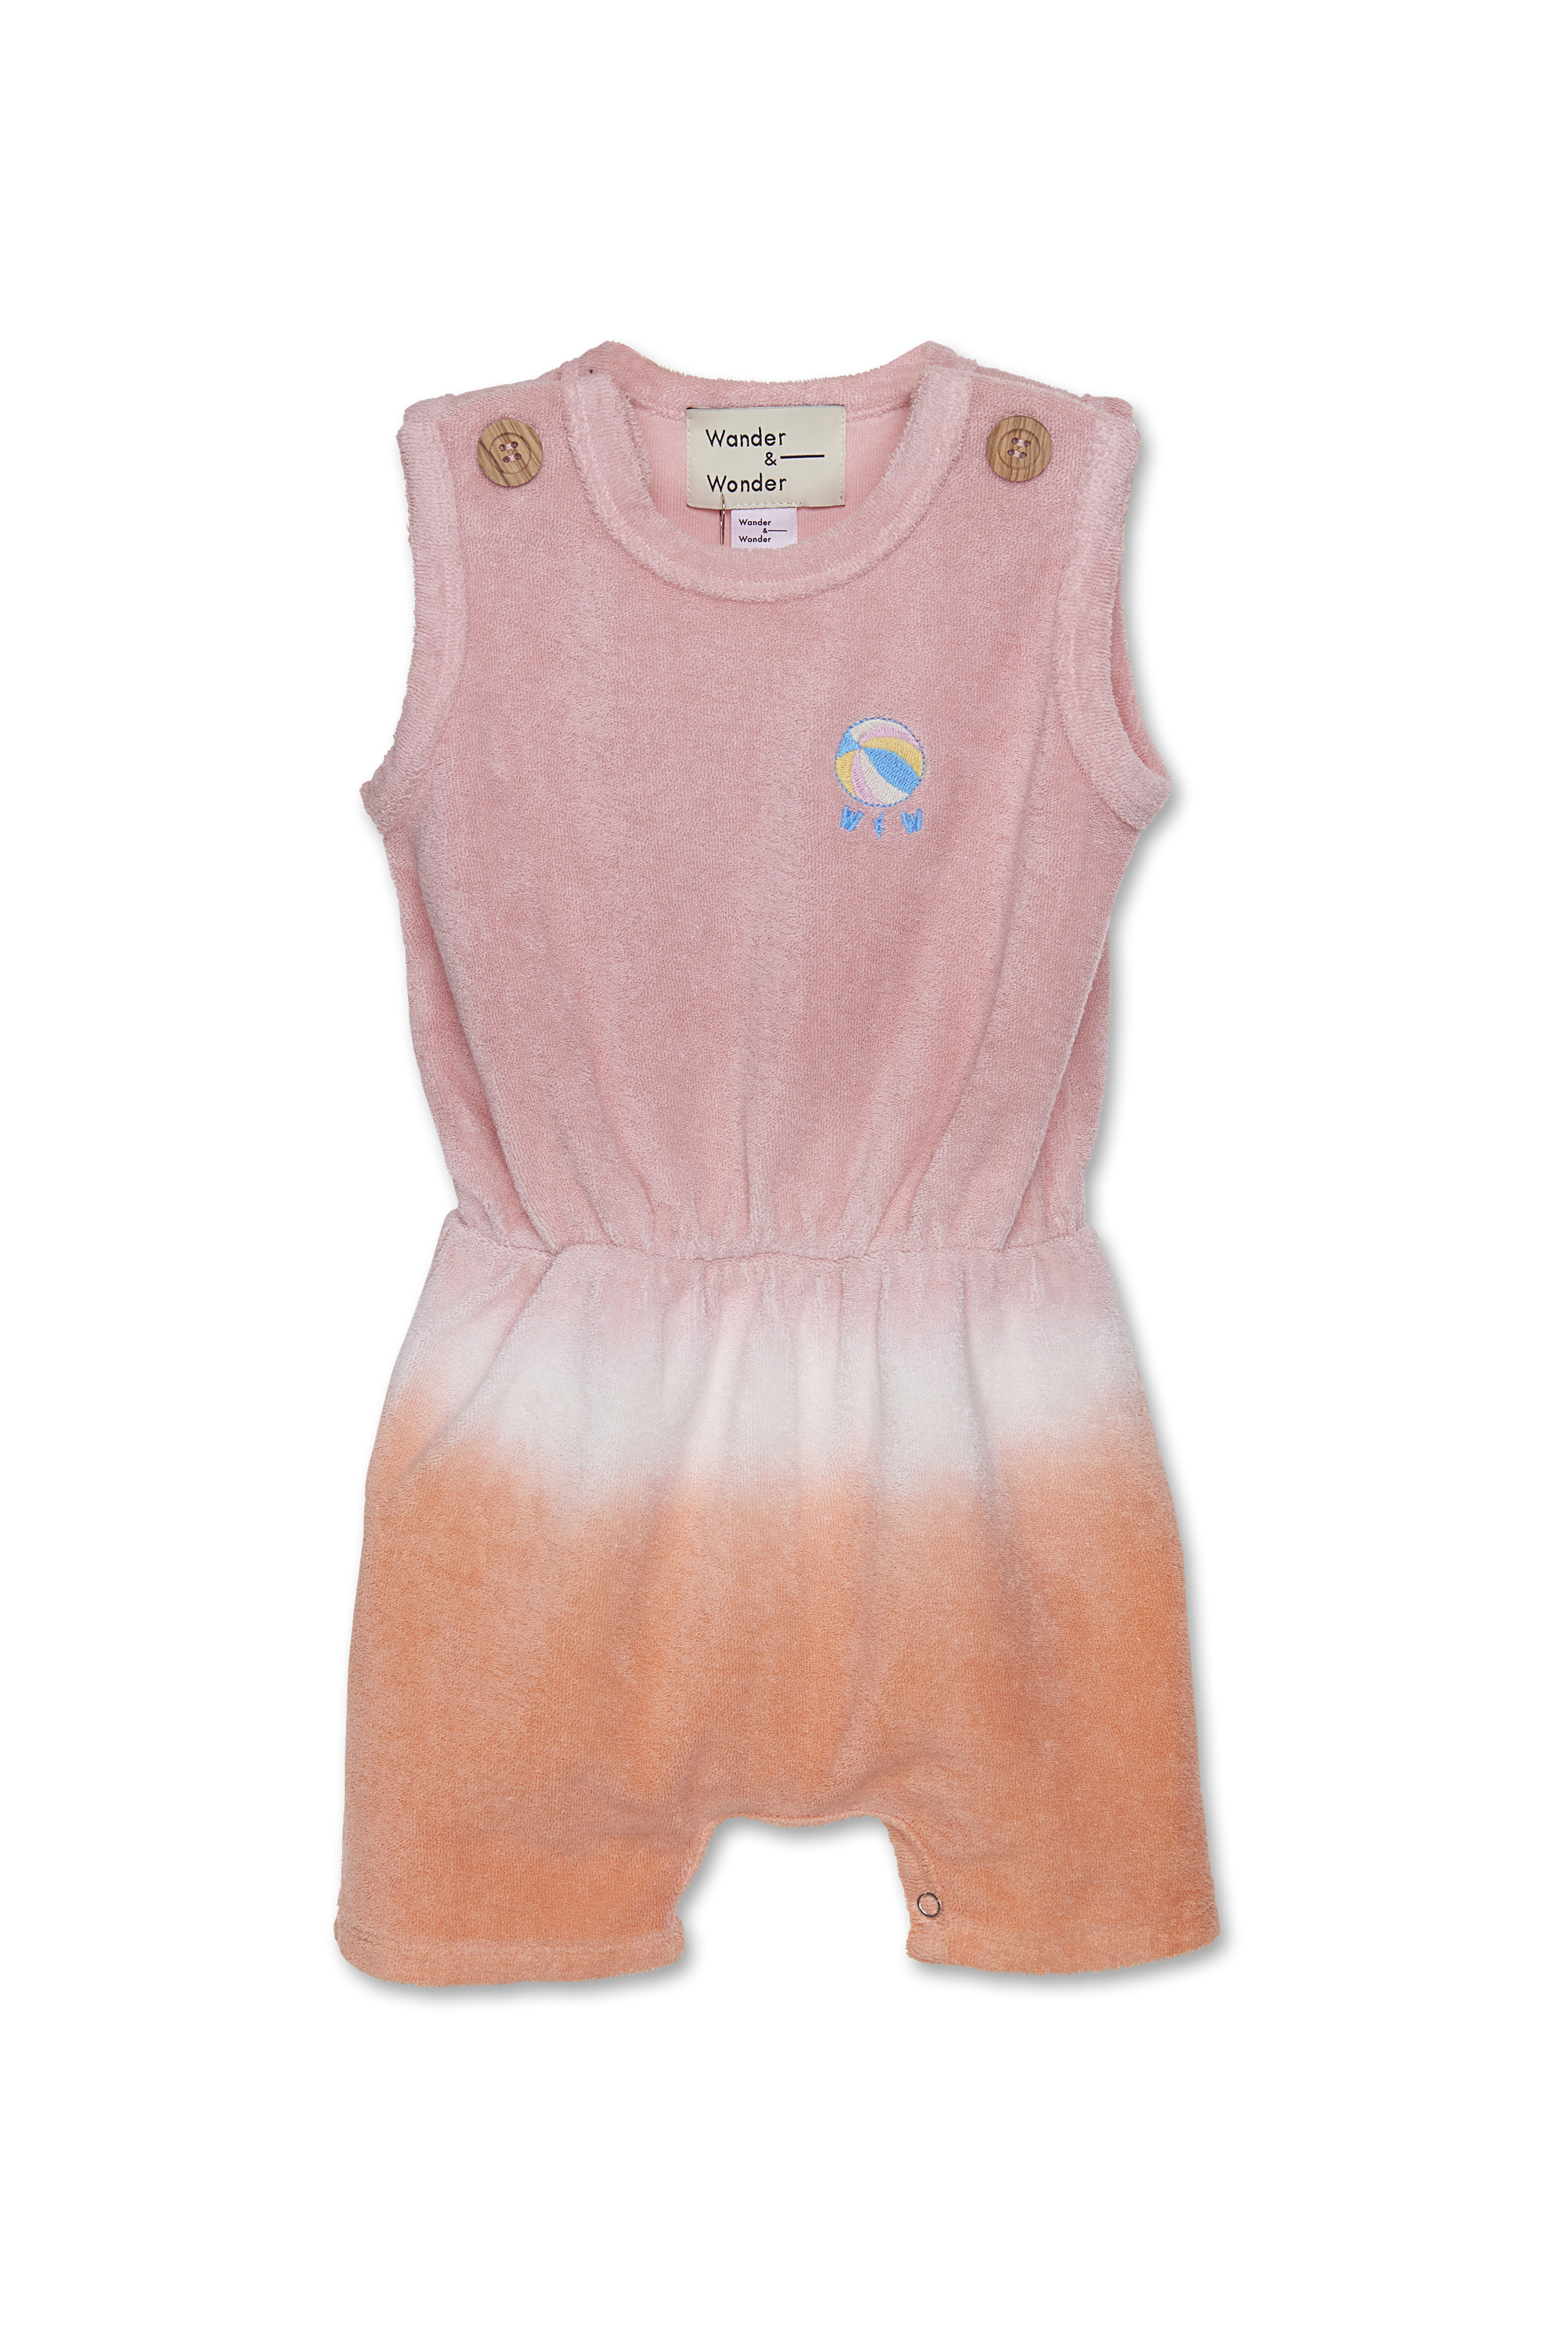 Wander and Wonder - baby terry romper - punch